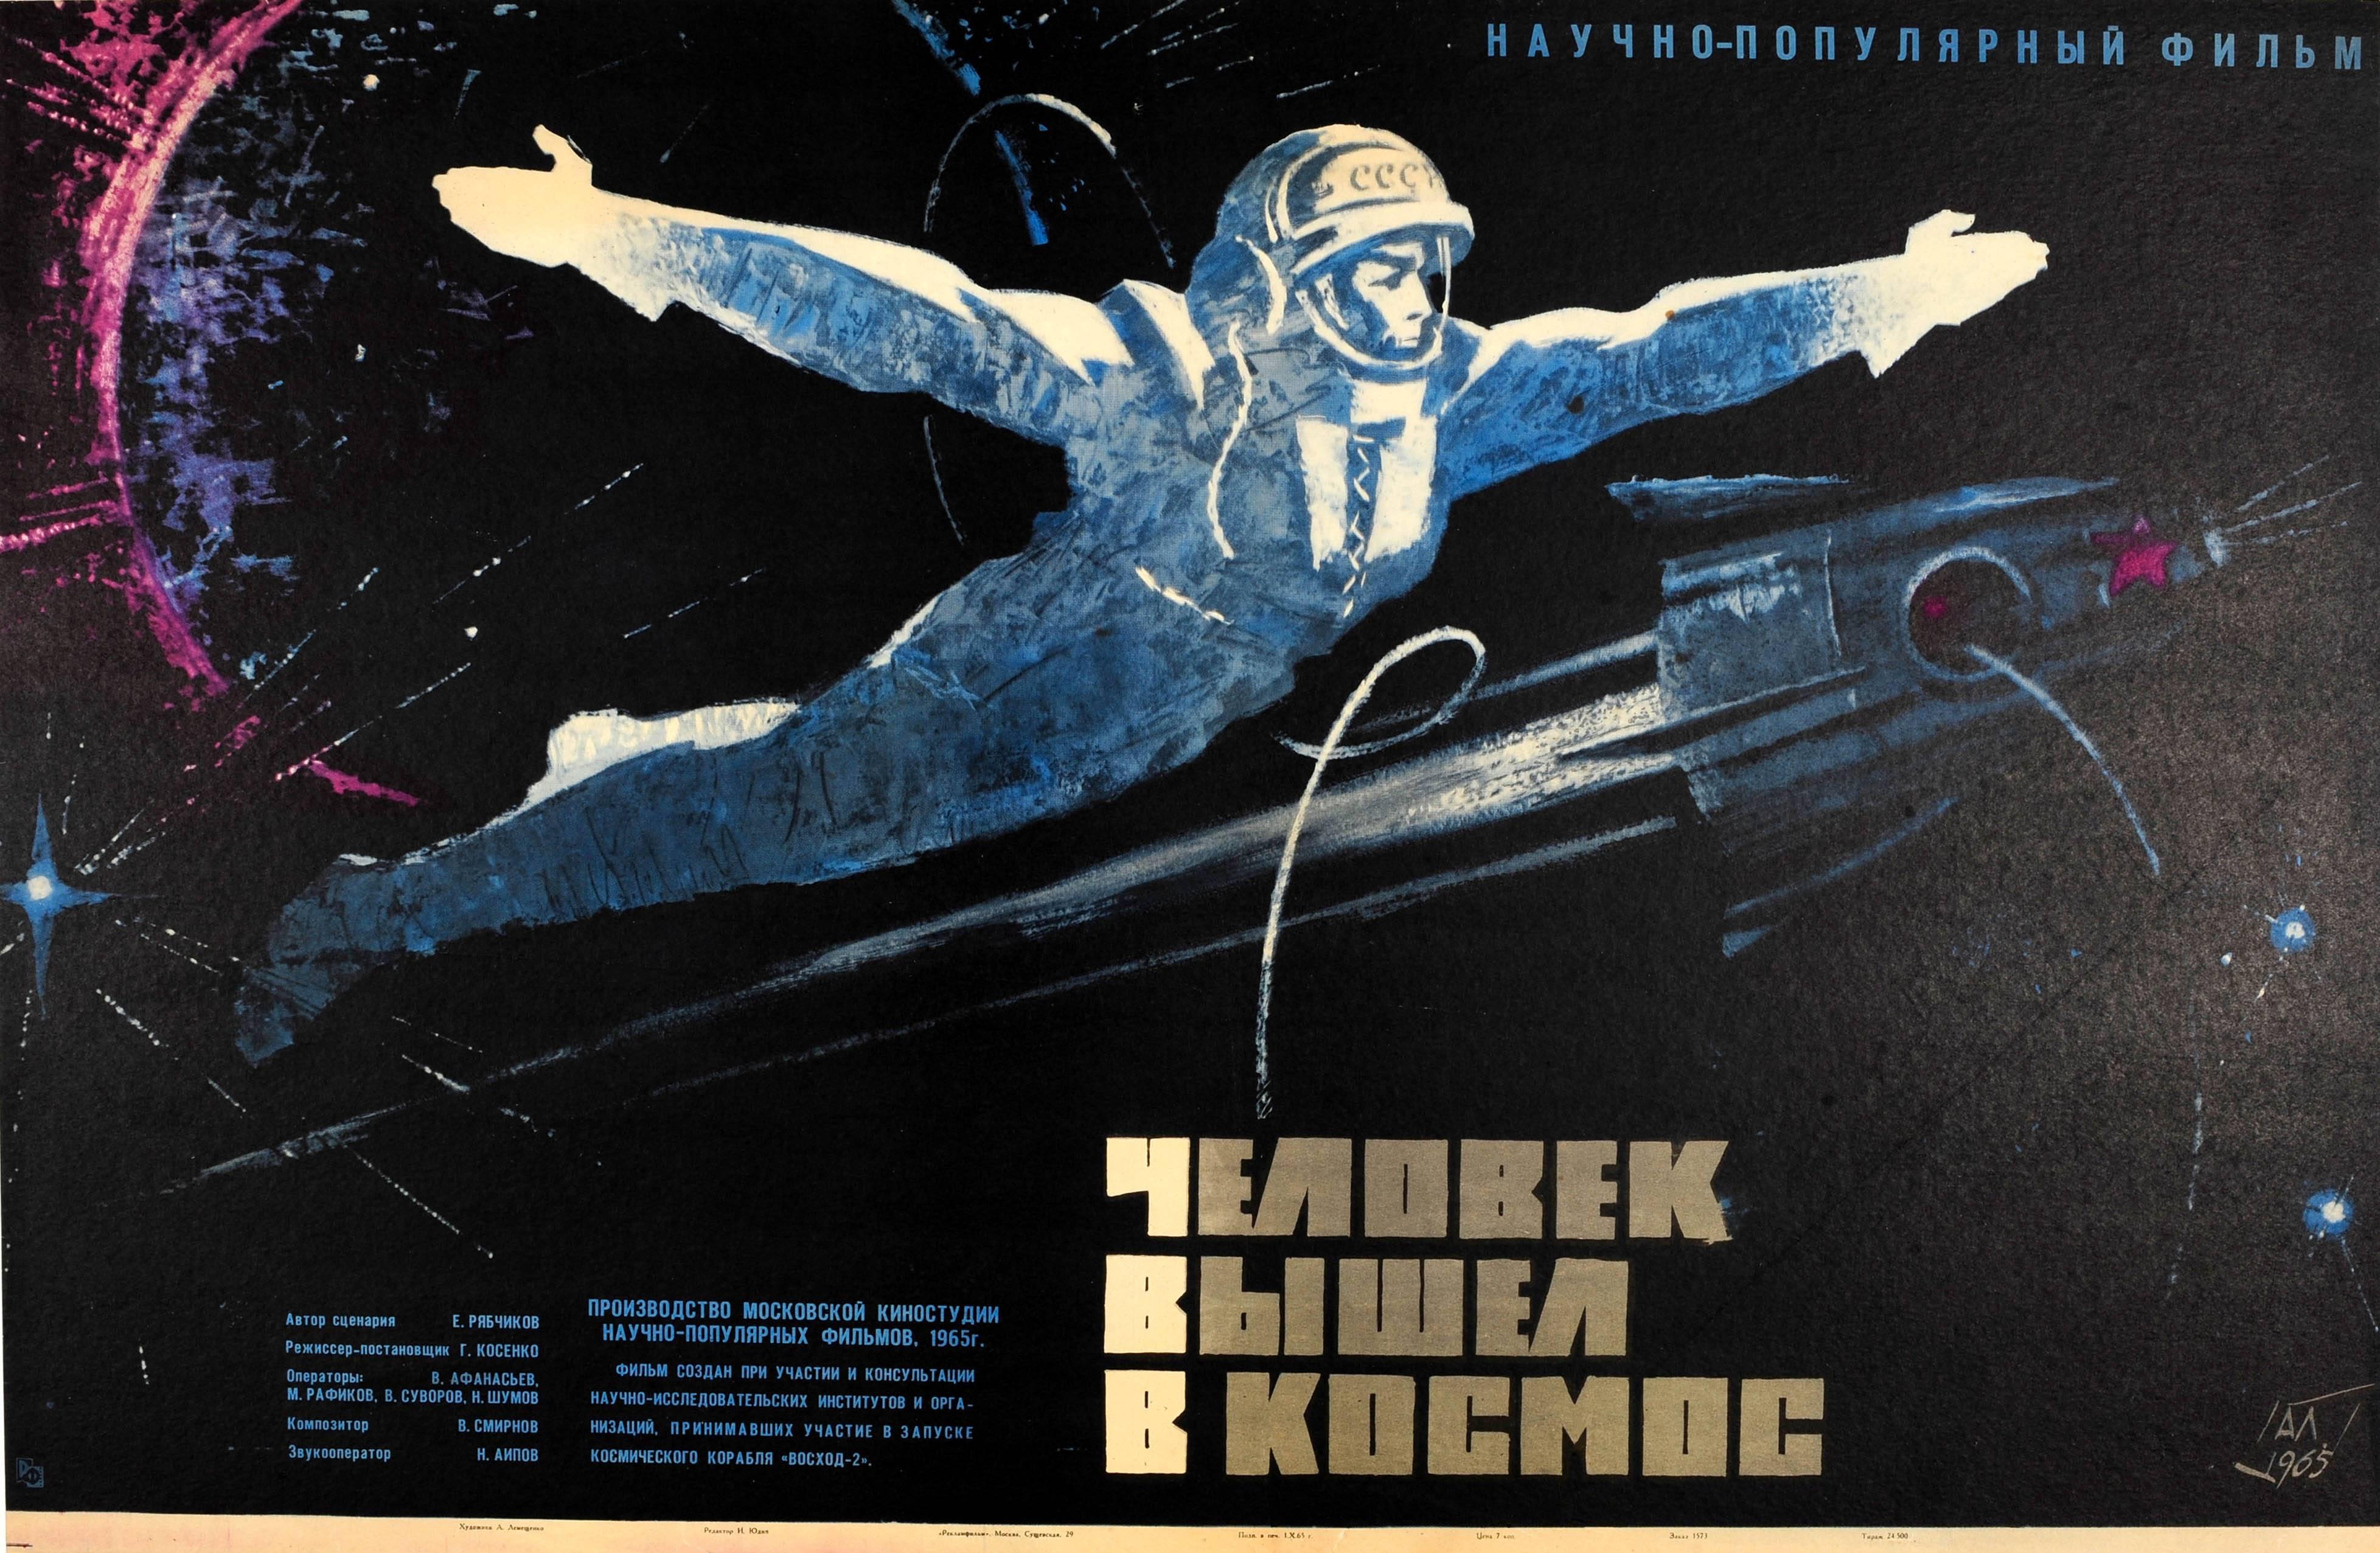 A. Lemeshchenko Print - Original Vintage Soviet Movie Poster For A Documentary Film - First Man In Space